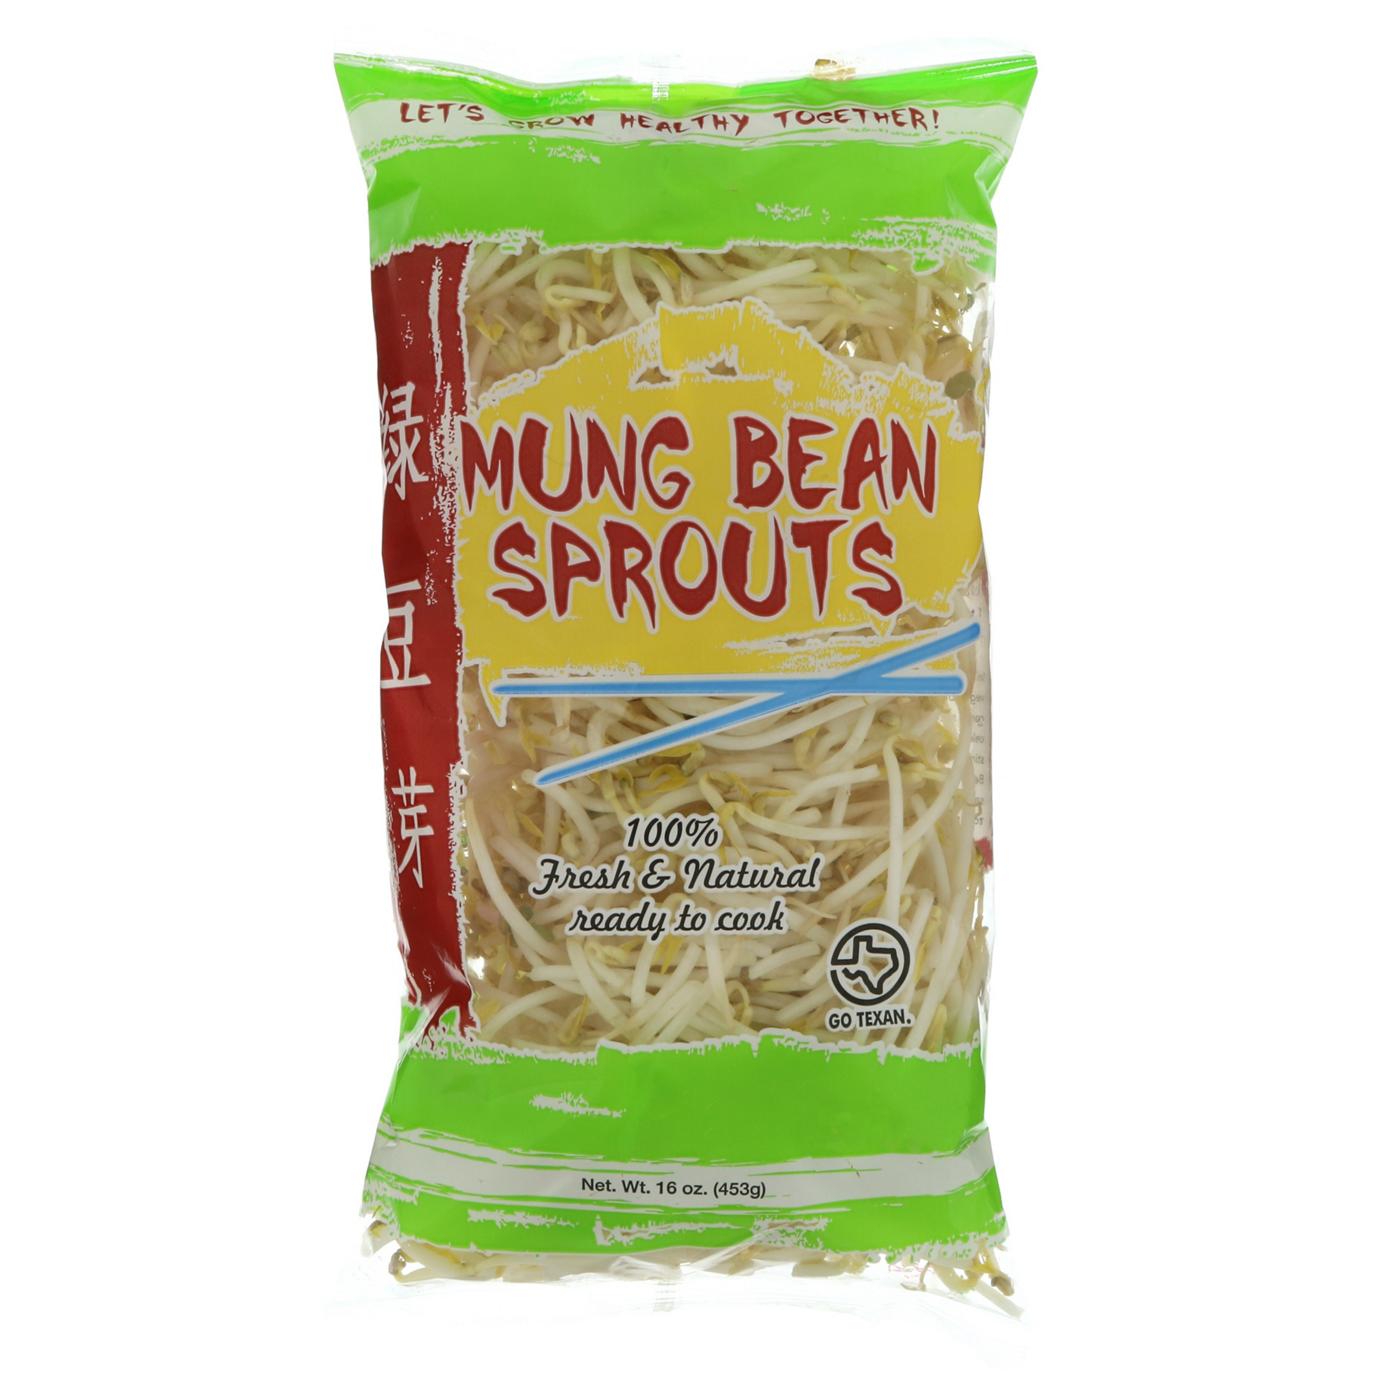 Fresh Mung Bean Sprouts; image 1 of 2